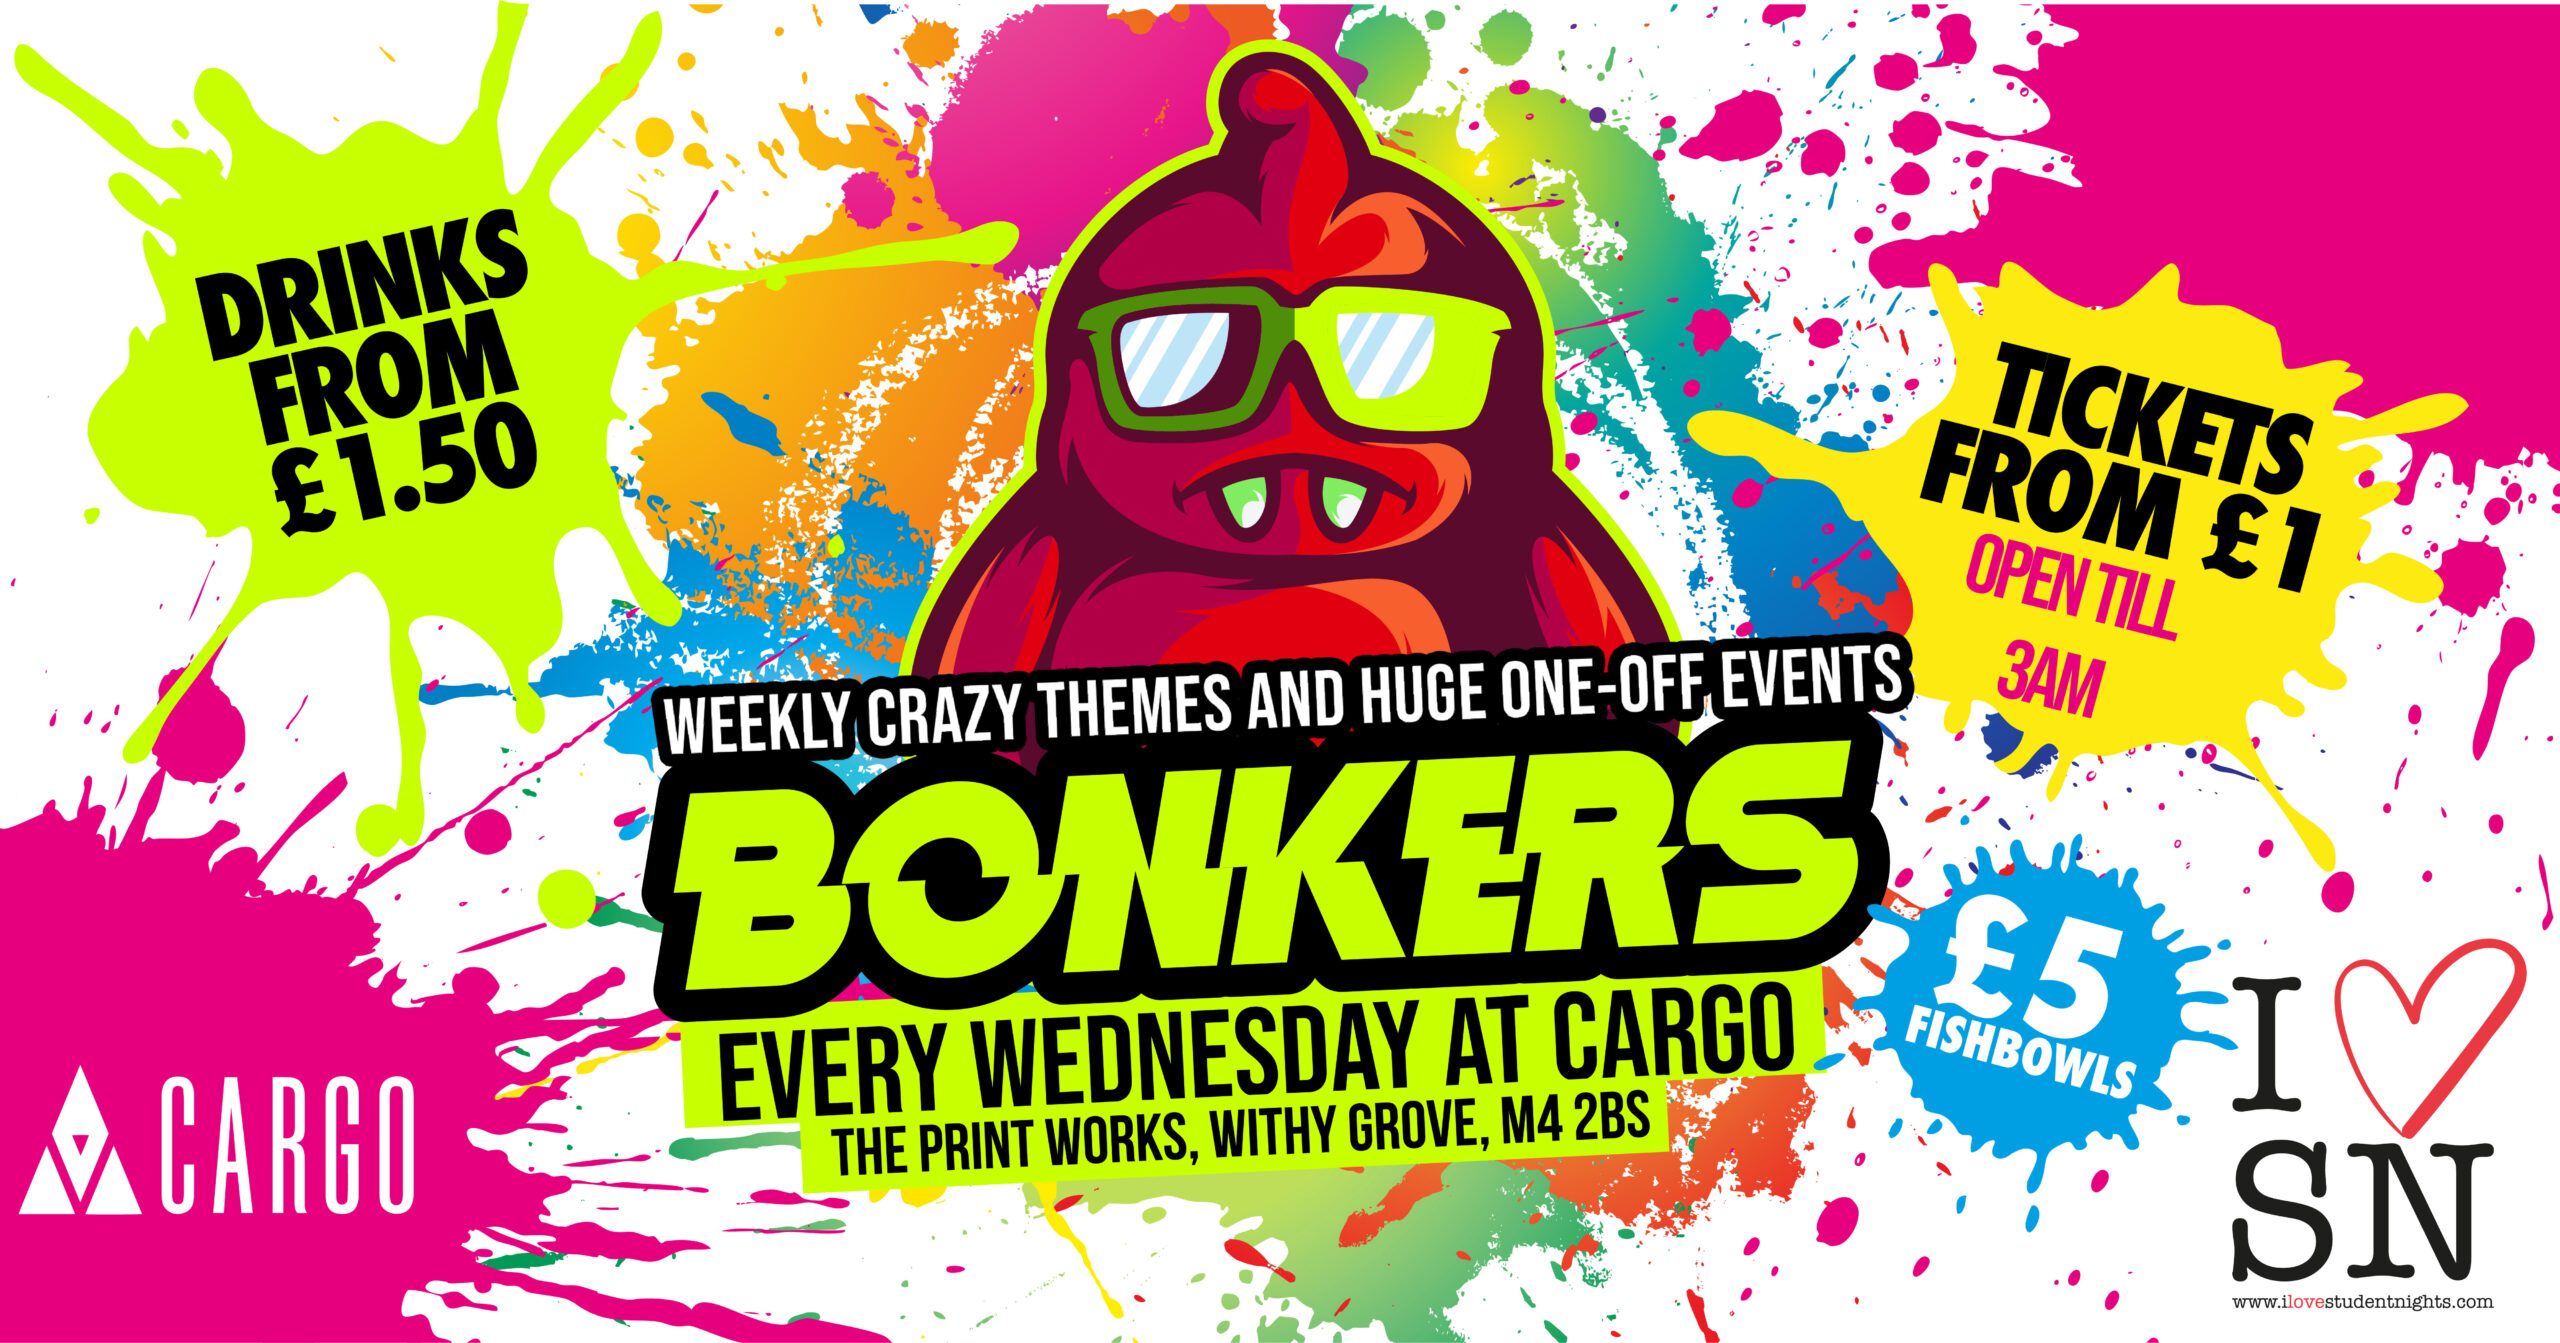 Bonkers Manchester every Wednesday at Cargo Student Night